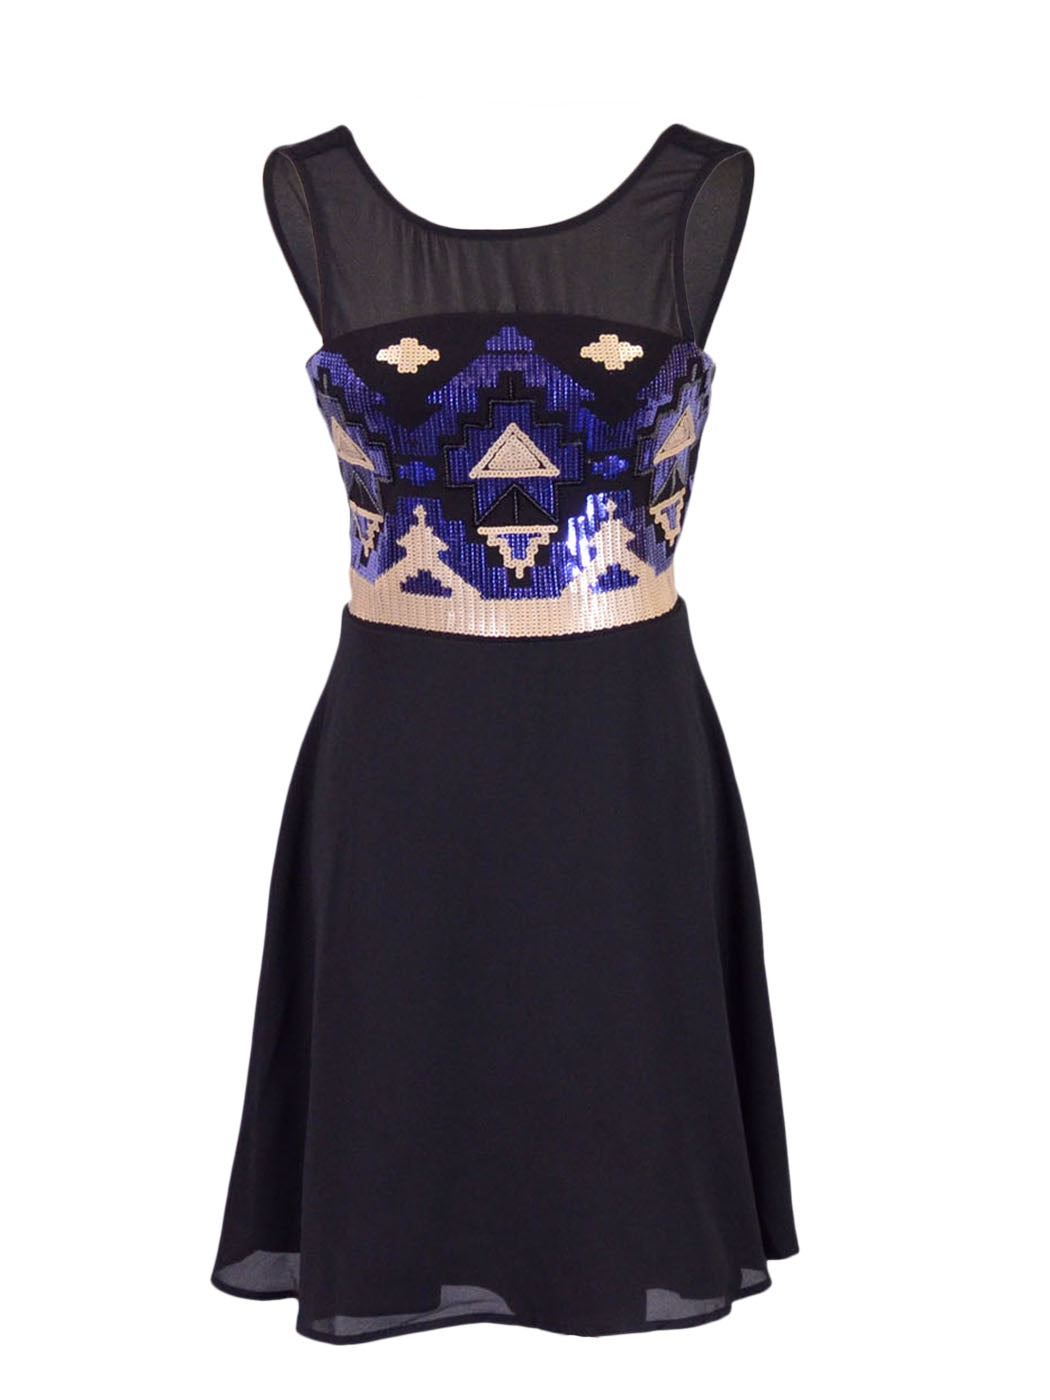 Anna-Kaci Sleeveless Fit And Flare Aztec Sequined Dress With V Back Neckline - ALILANG.COM